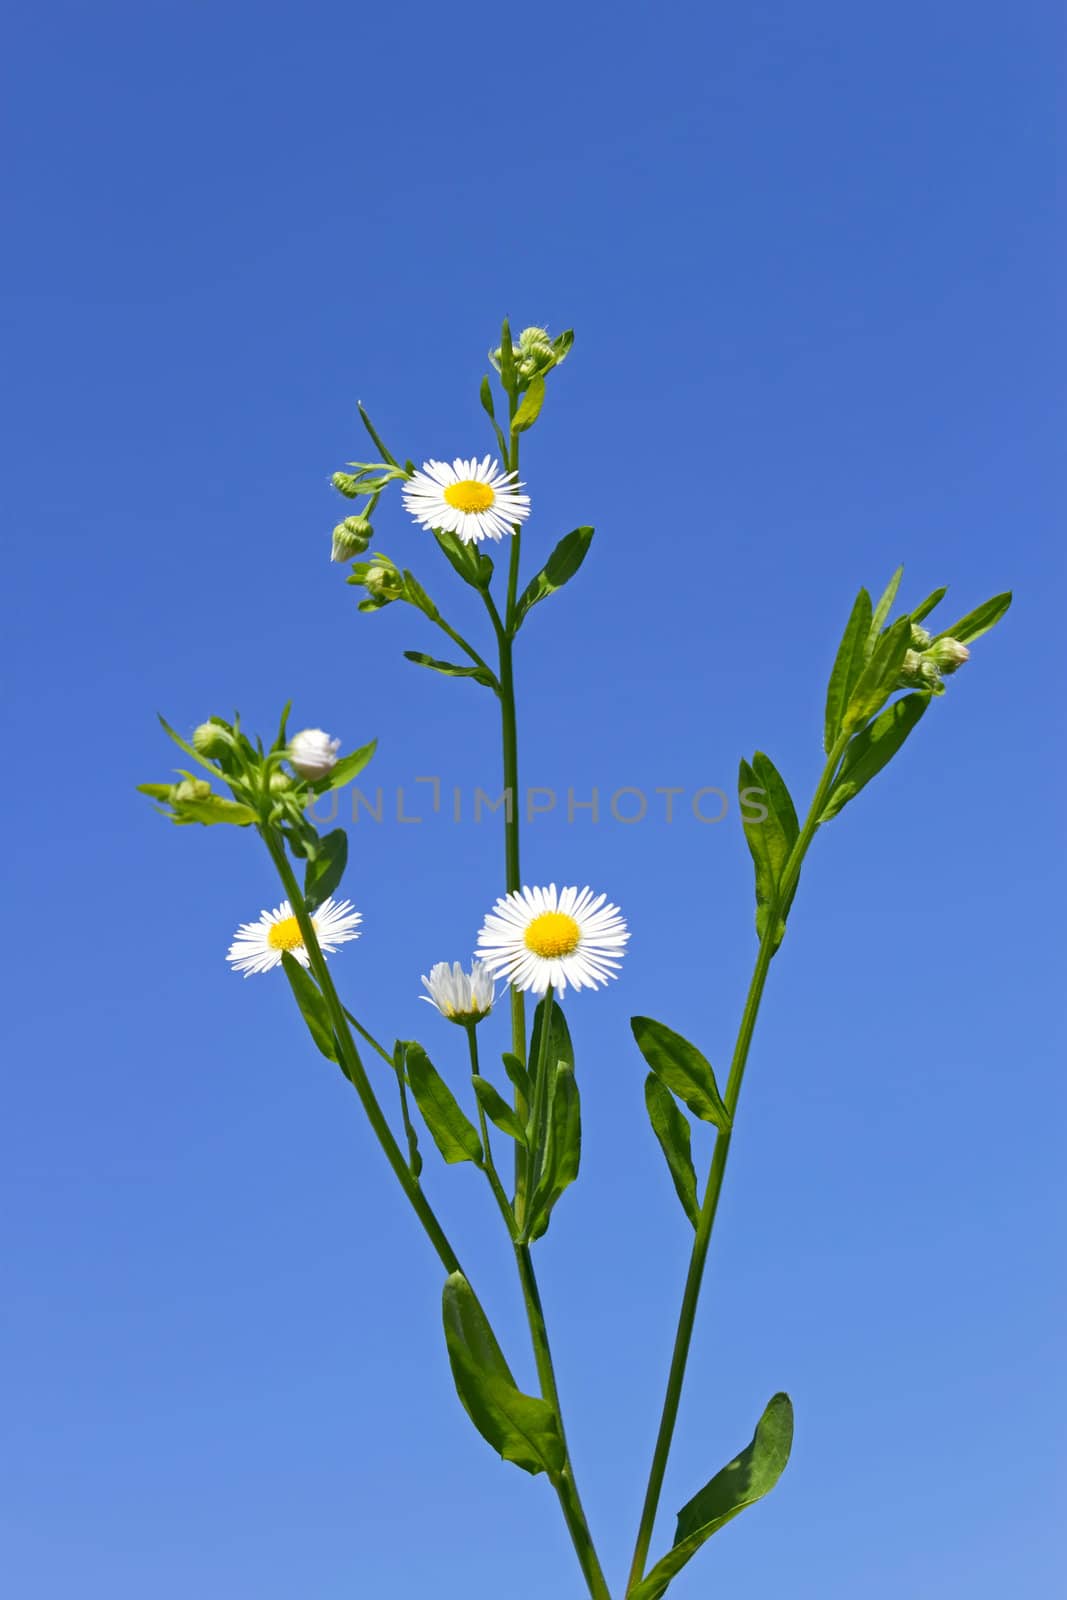 Plant of daisies by qiiip